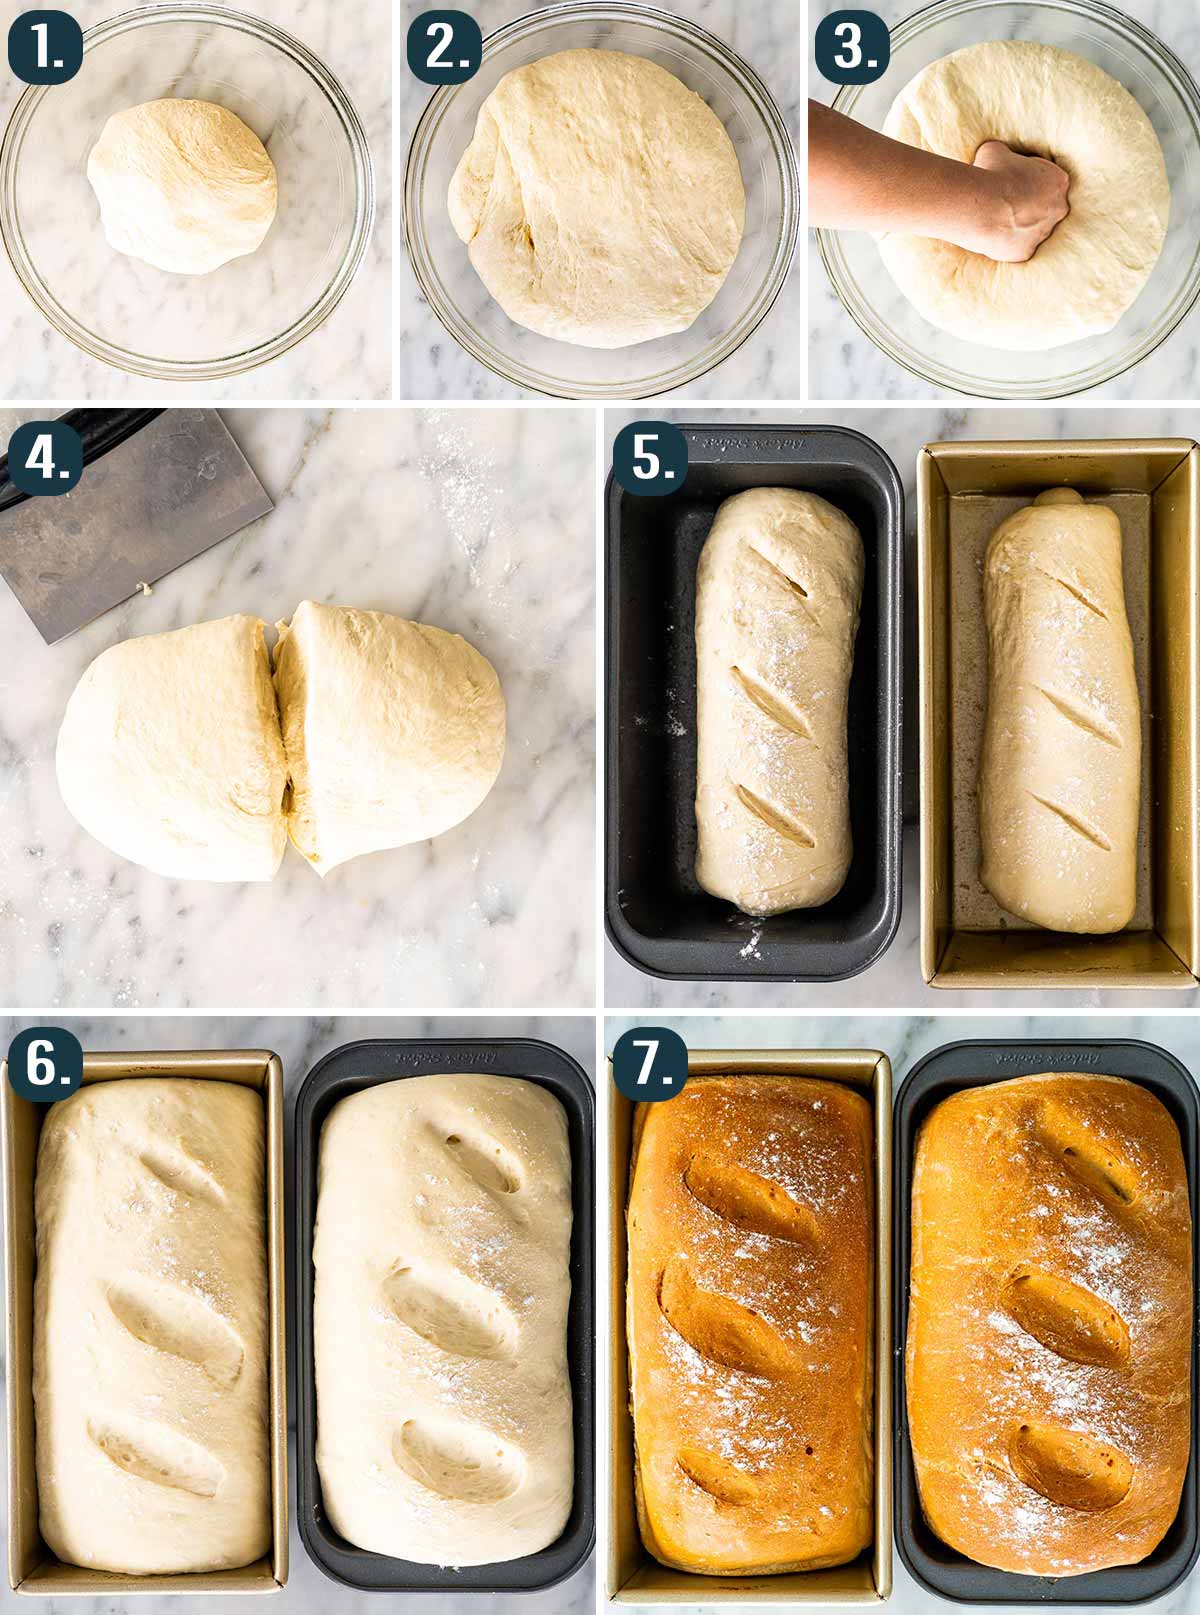 process shots showing how to shape the dough for potato bread.